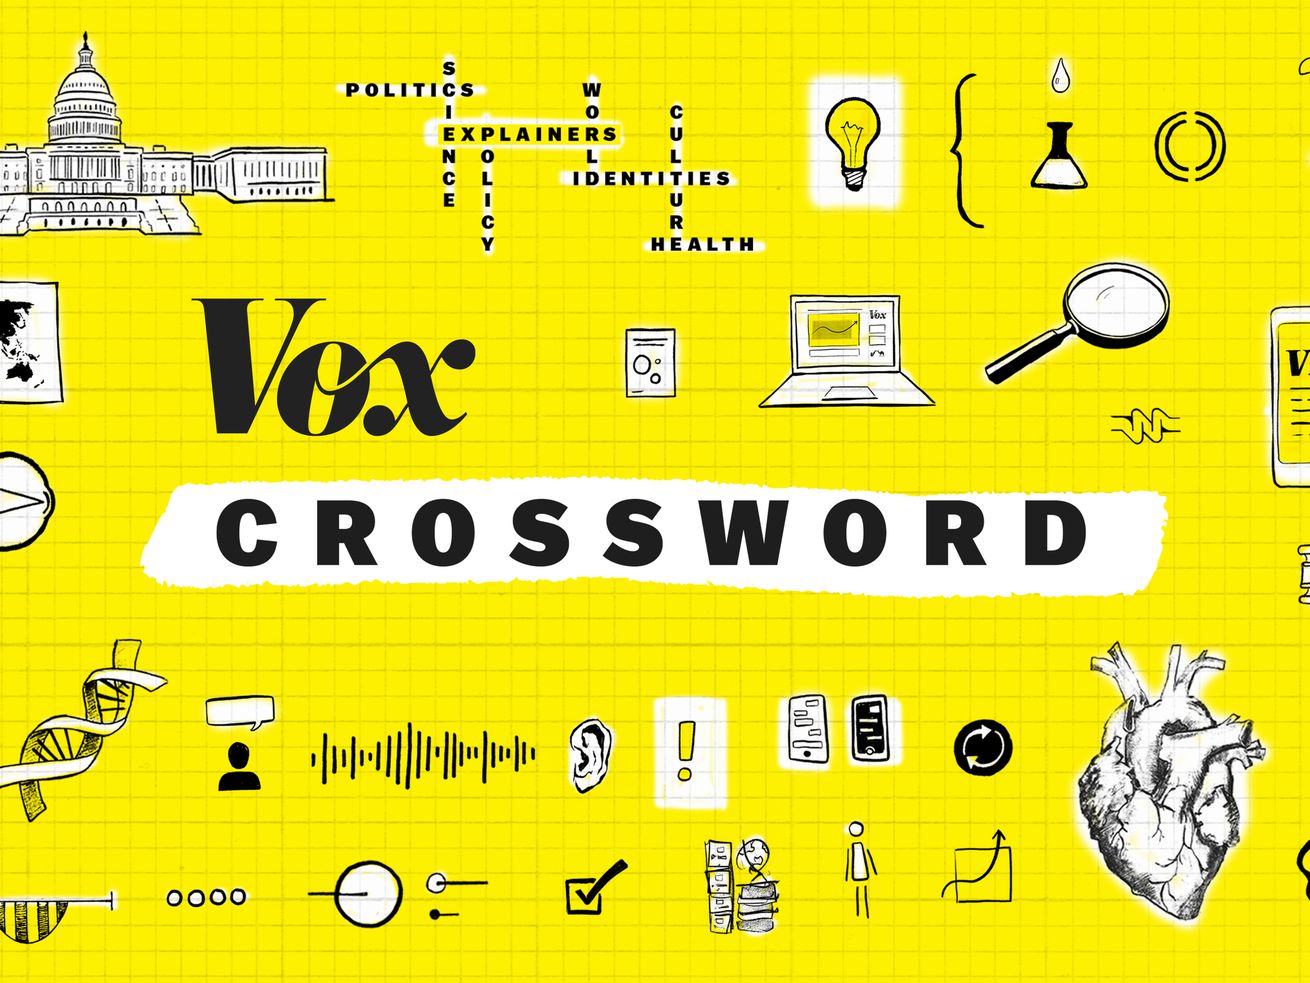 New Vox Crossword puzzles come out Monday through Saturday